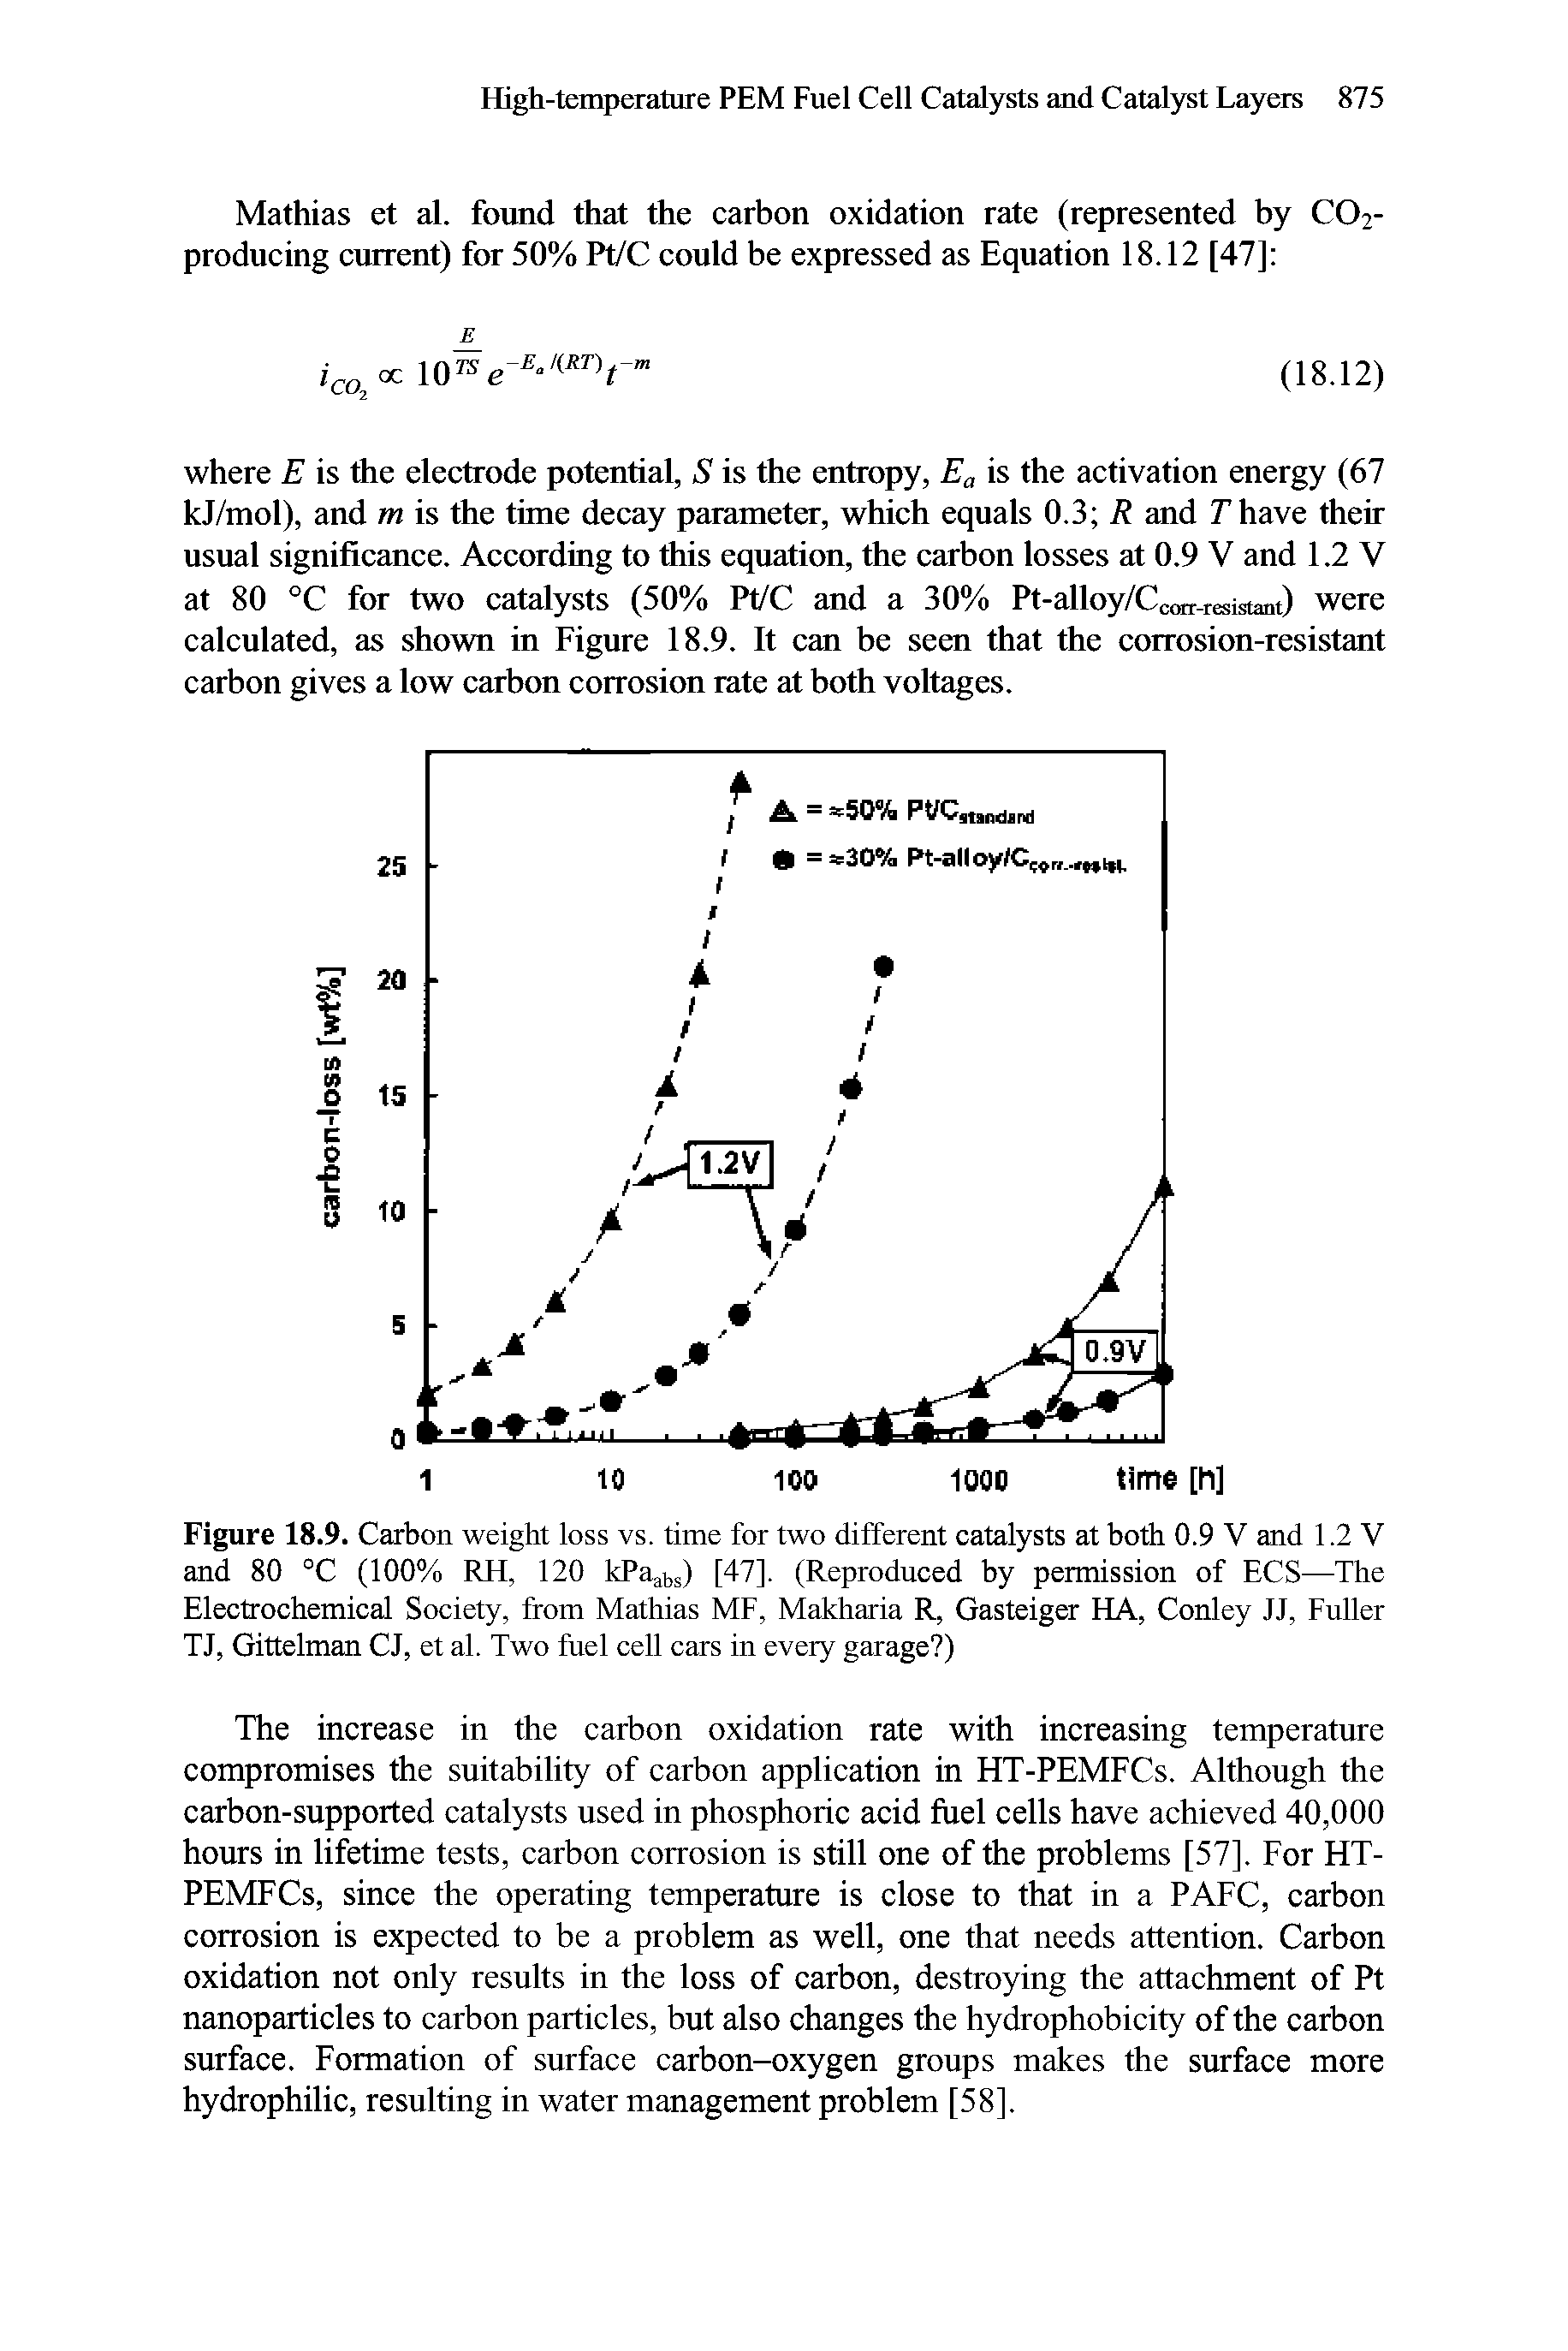 Figure 18.9. Carbon weight loss vs. time for two different catalysts at both 0.9 V and 1.2 V and 80 °C (100% RH, 120 kPa,bs) [47]. (Reproduced by permission of ECS—The Electrochemieal Society, from Mathias ME, Makharia R, Gasteiger HA, Conley JJ, Fnller TJ, Gittelman CJ, et al. Two fuel cell cars in every garage )...